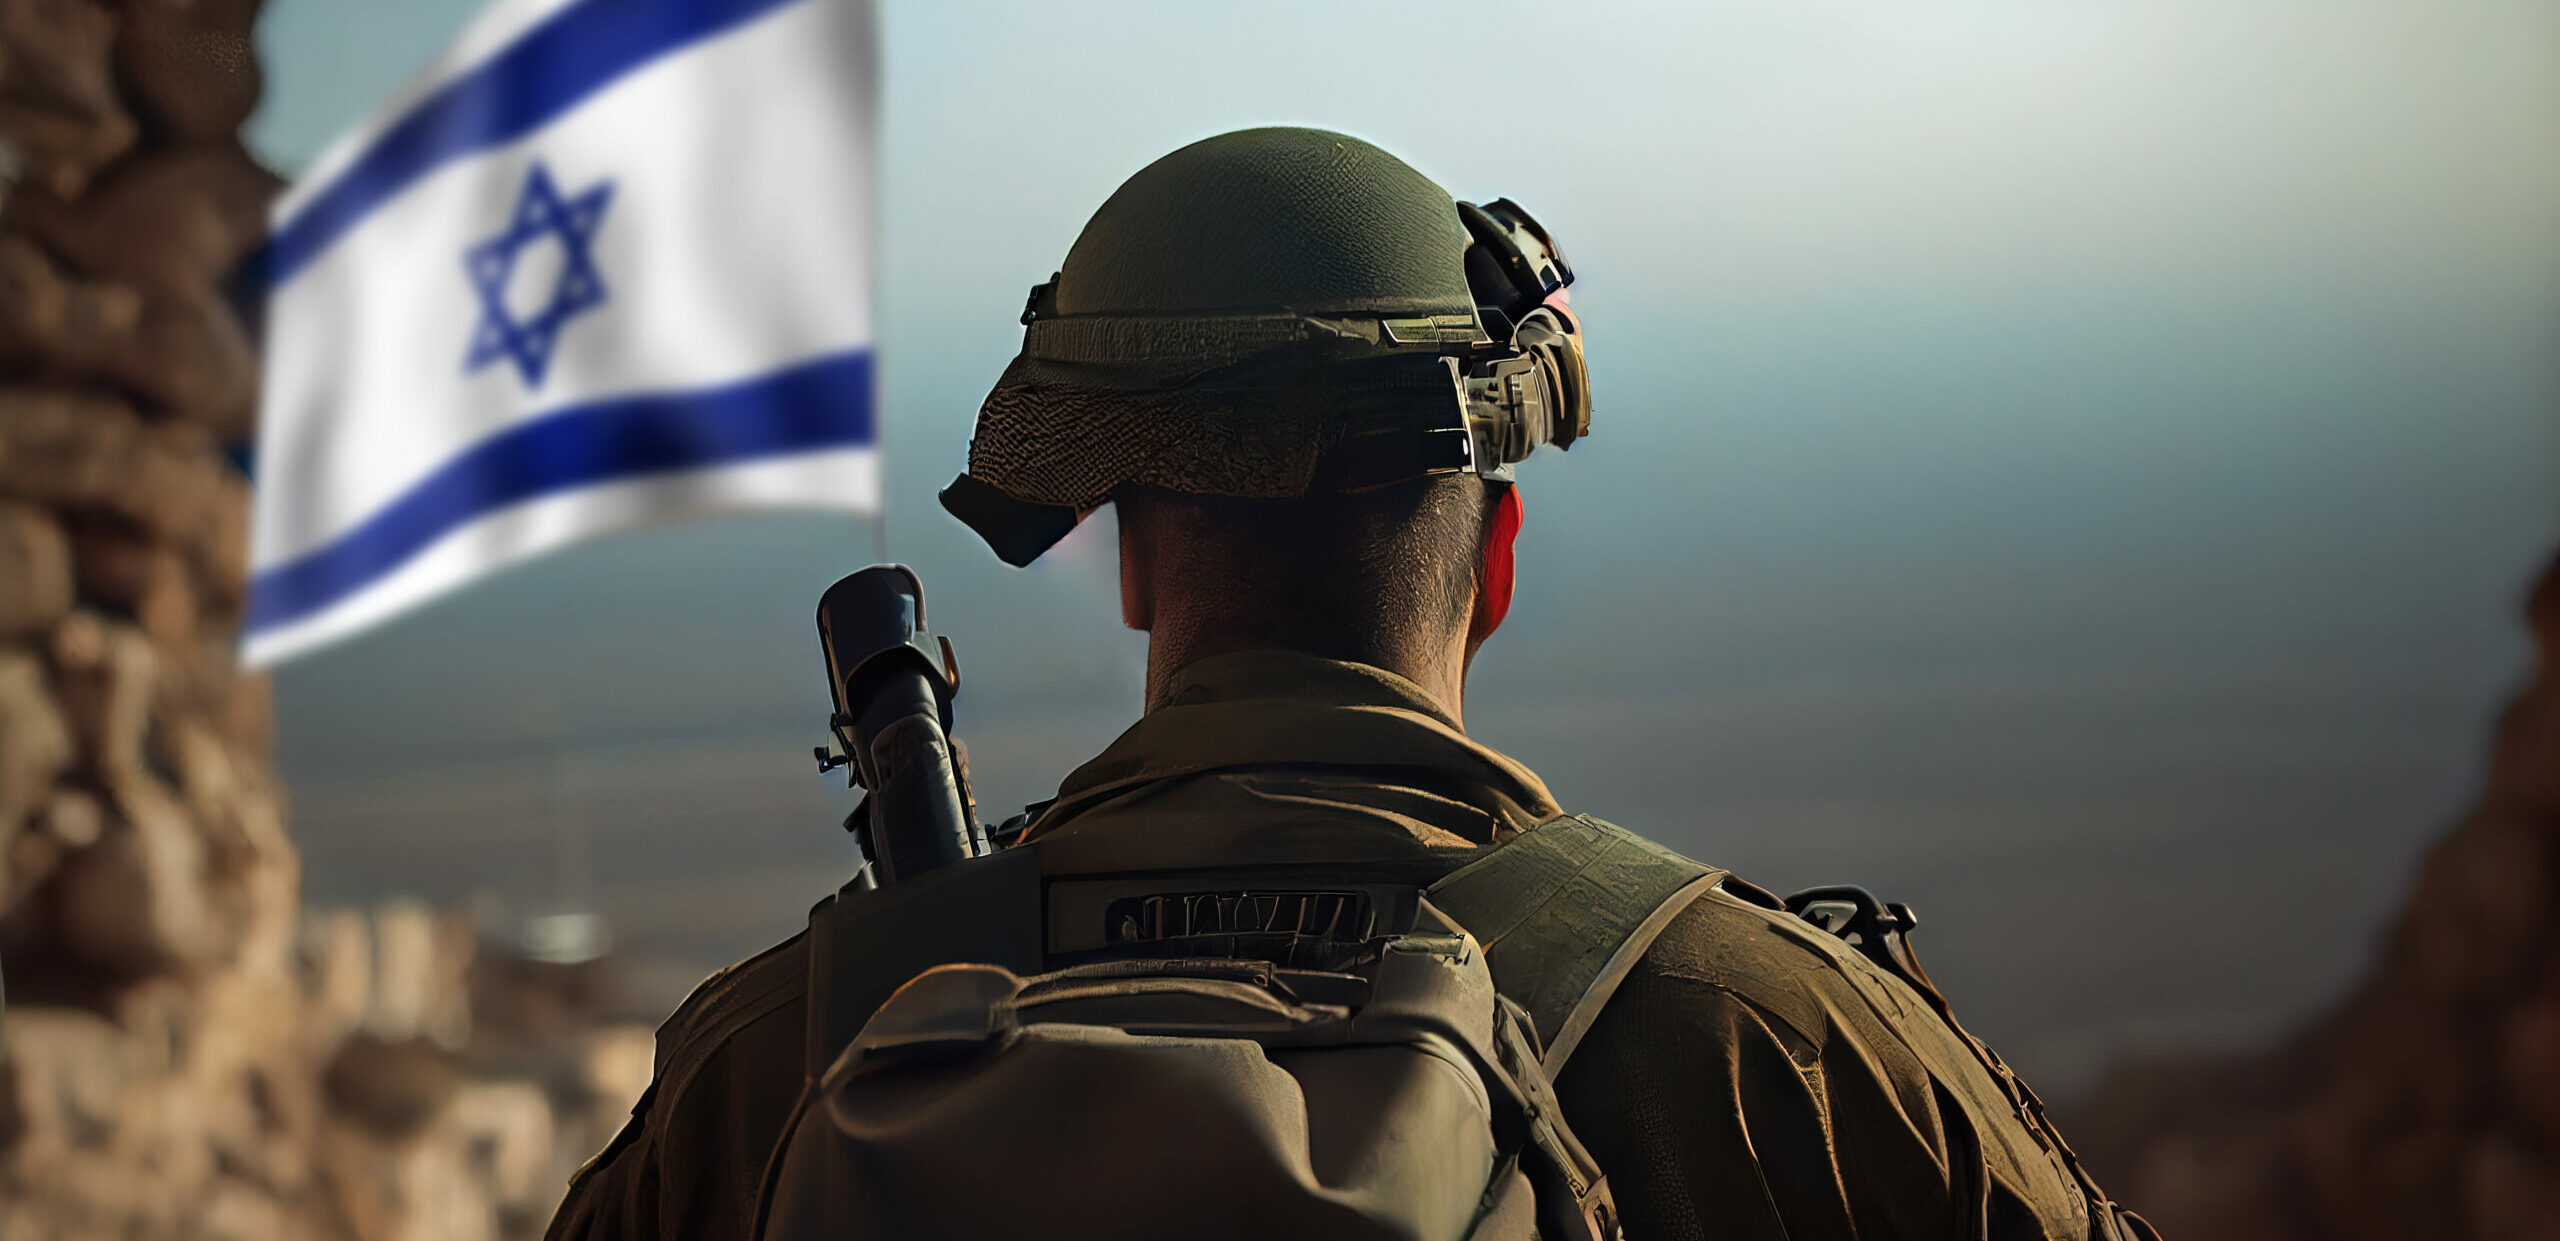 Patriotic Israeli Soldier with Flag Back View. Military. Patriotism. Honor. Respect. Stars and Stripes. Service. Pride. Duty. Sacrifice